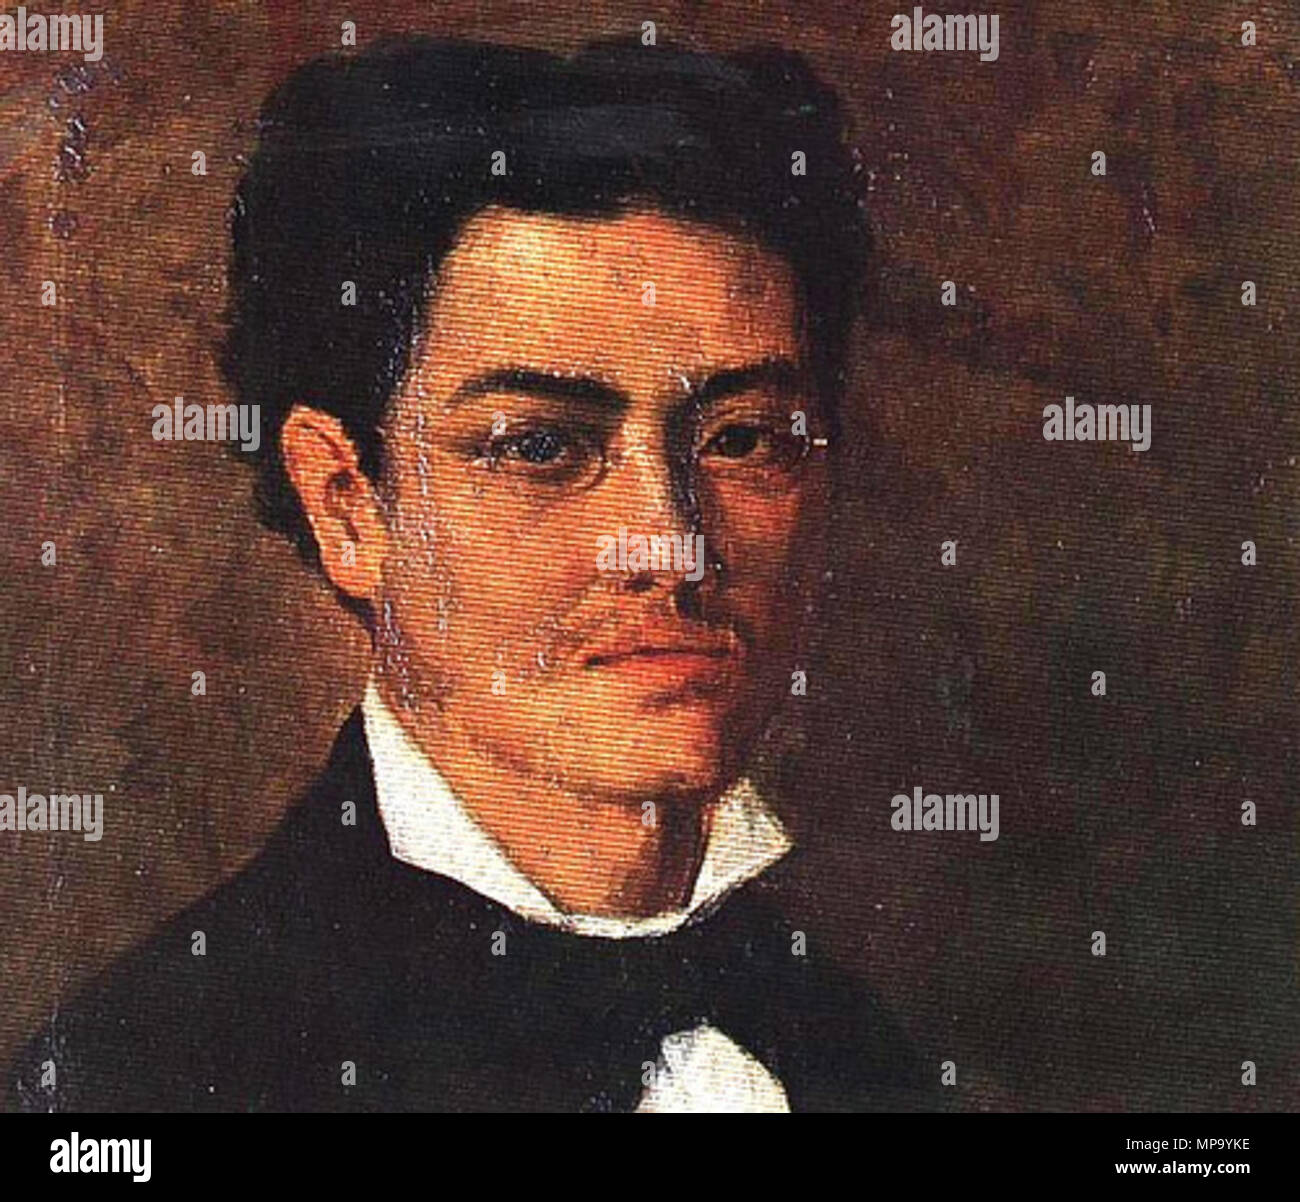 Juan Luna's Japanese sketchbook-diary to be auctioned off; initial bid  price: P1M